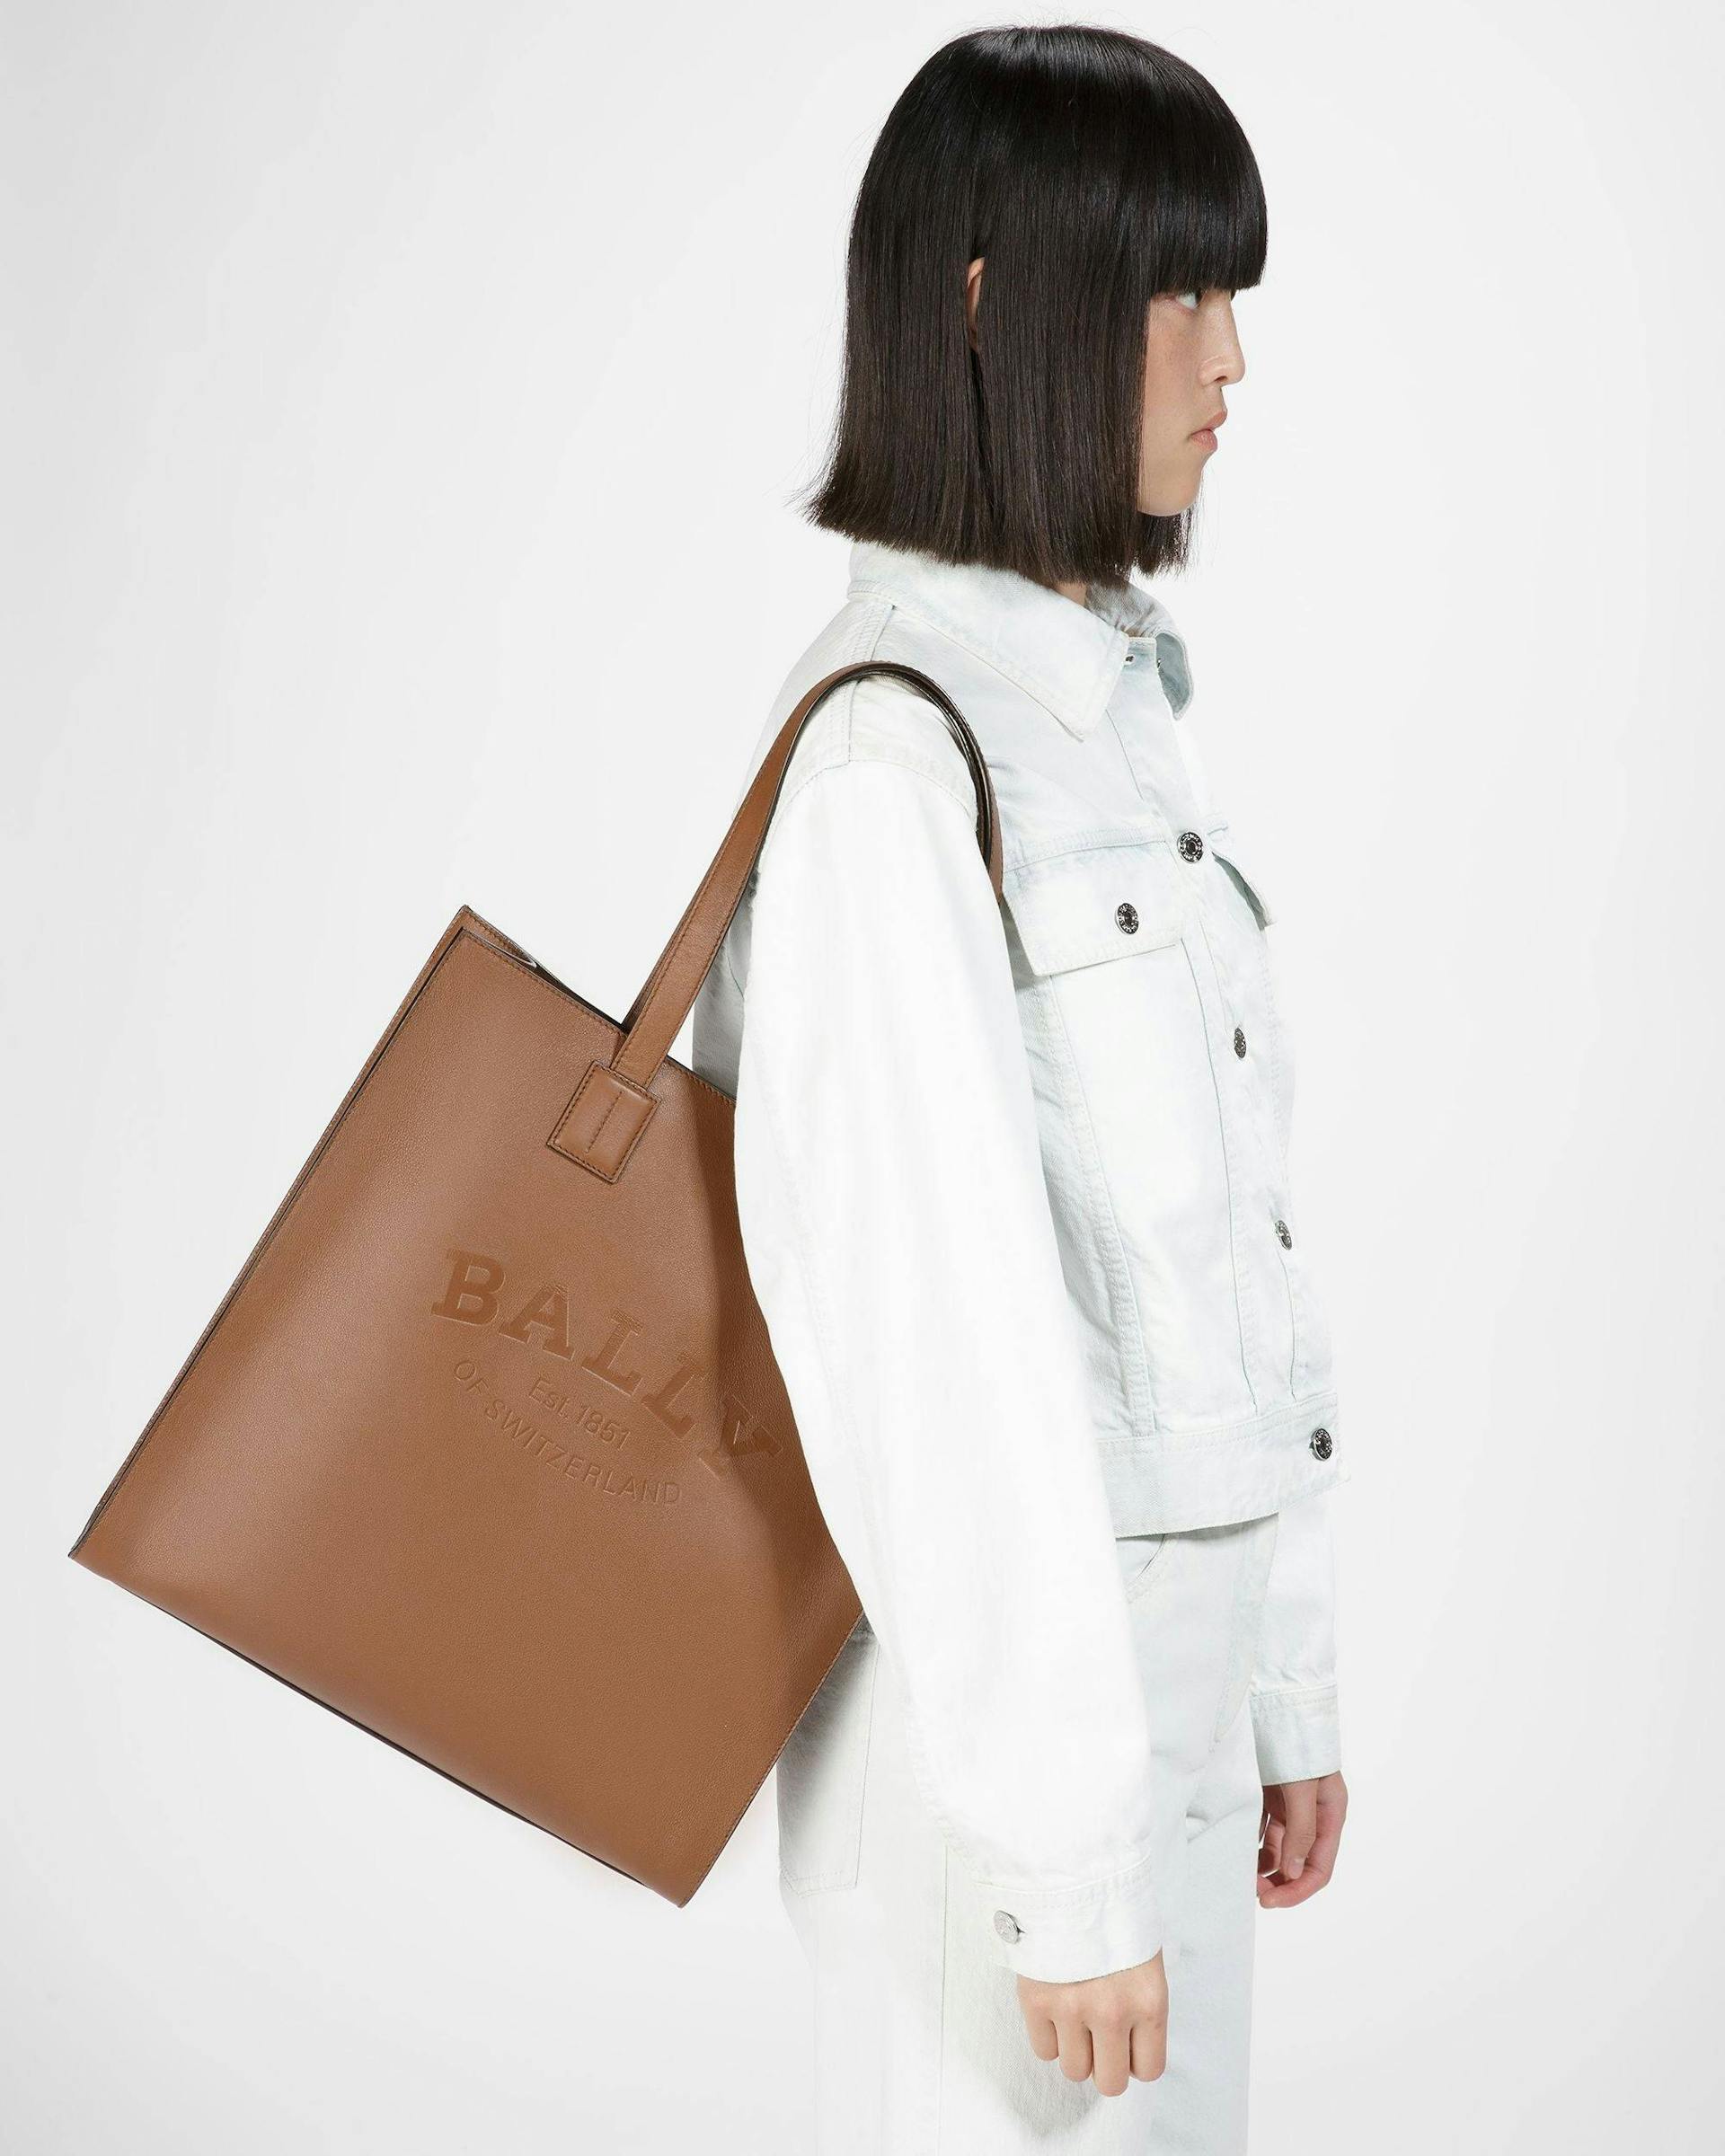 Crystalia Leather Tote In Brown - Women's - Bally - 02